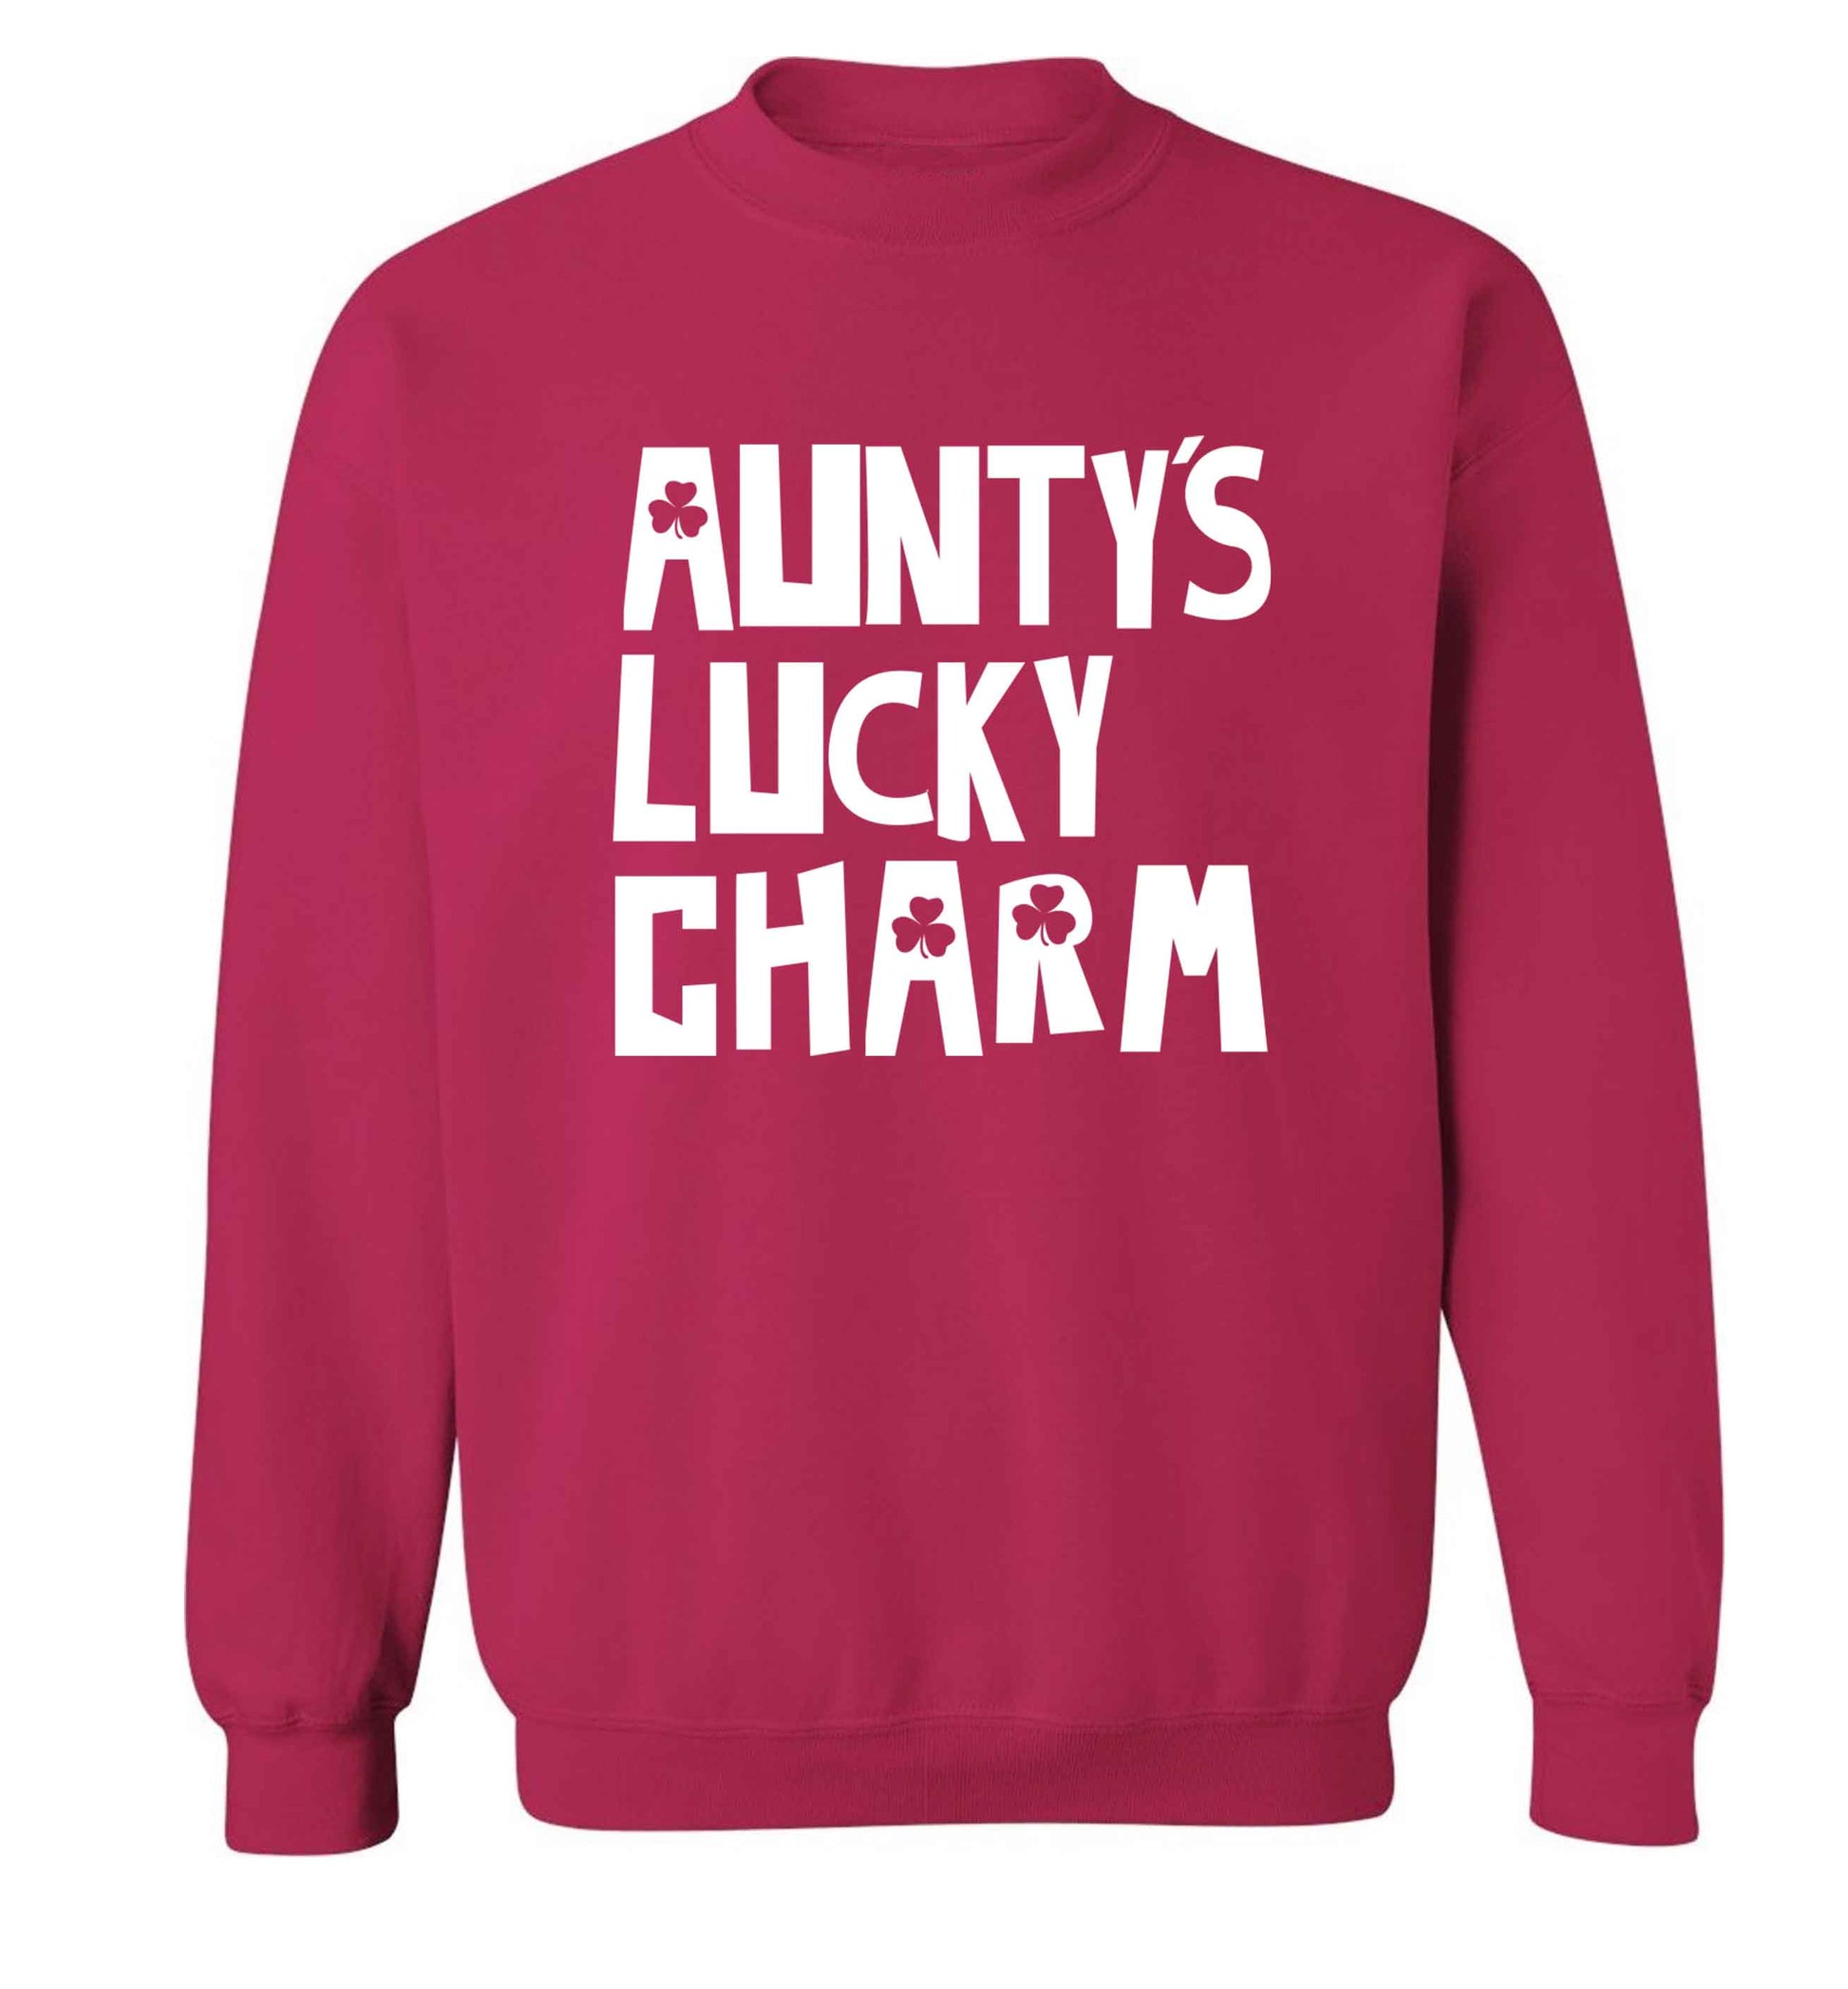 Aunty's lucky charm adult's unisex pink sweater 2XL